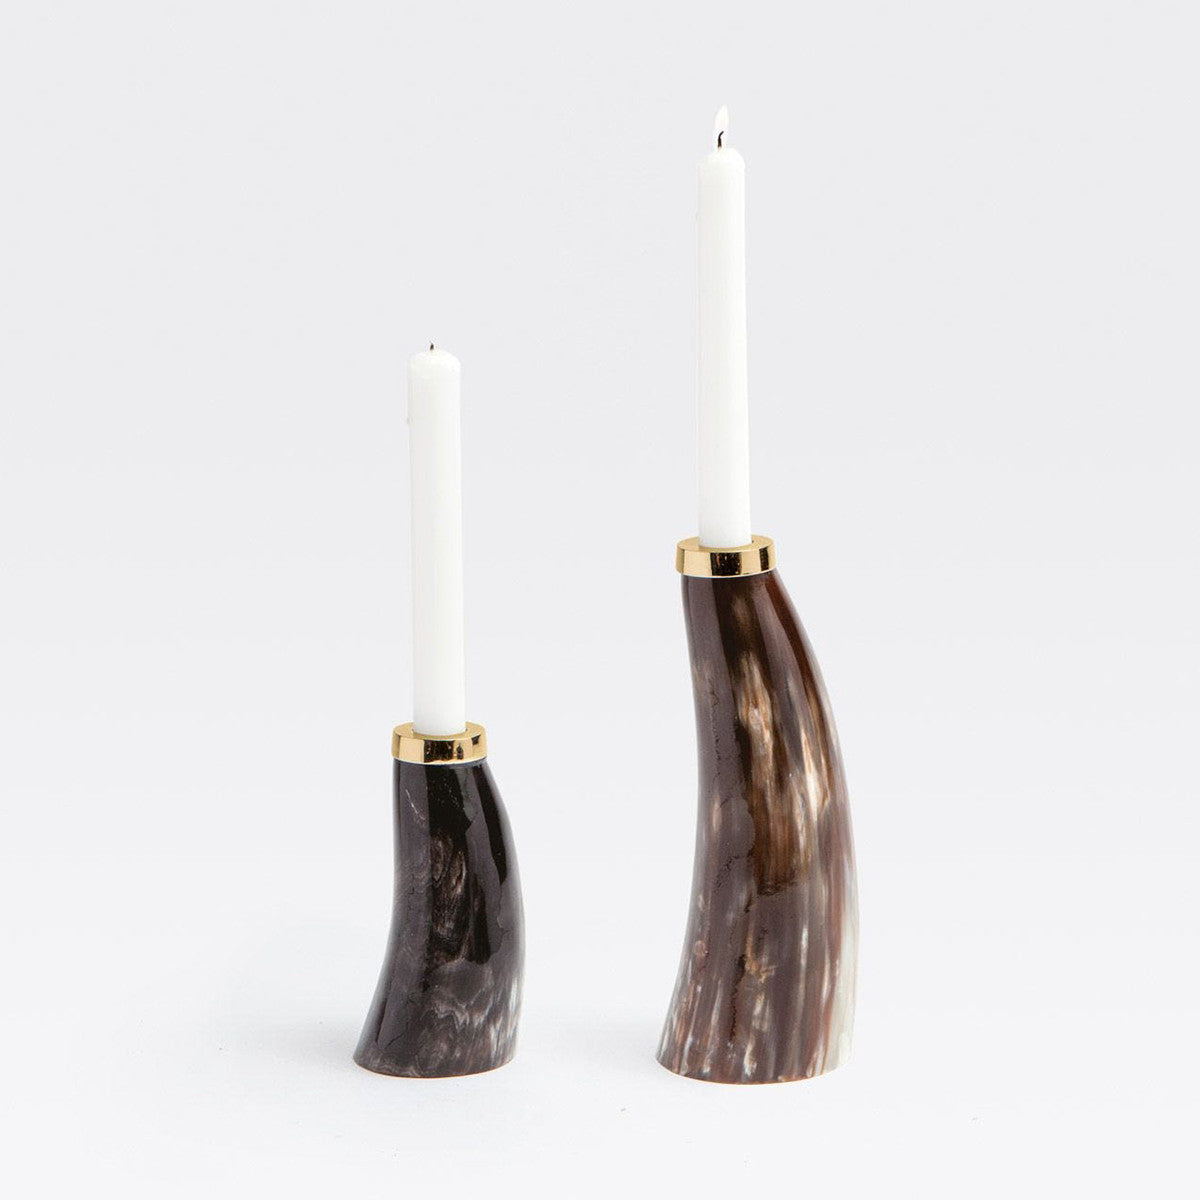 Blue Pheasant Brian Mixed Horn Candle Holders (Set of 2)